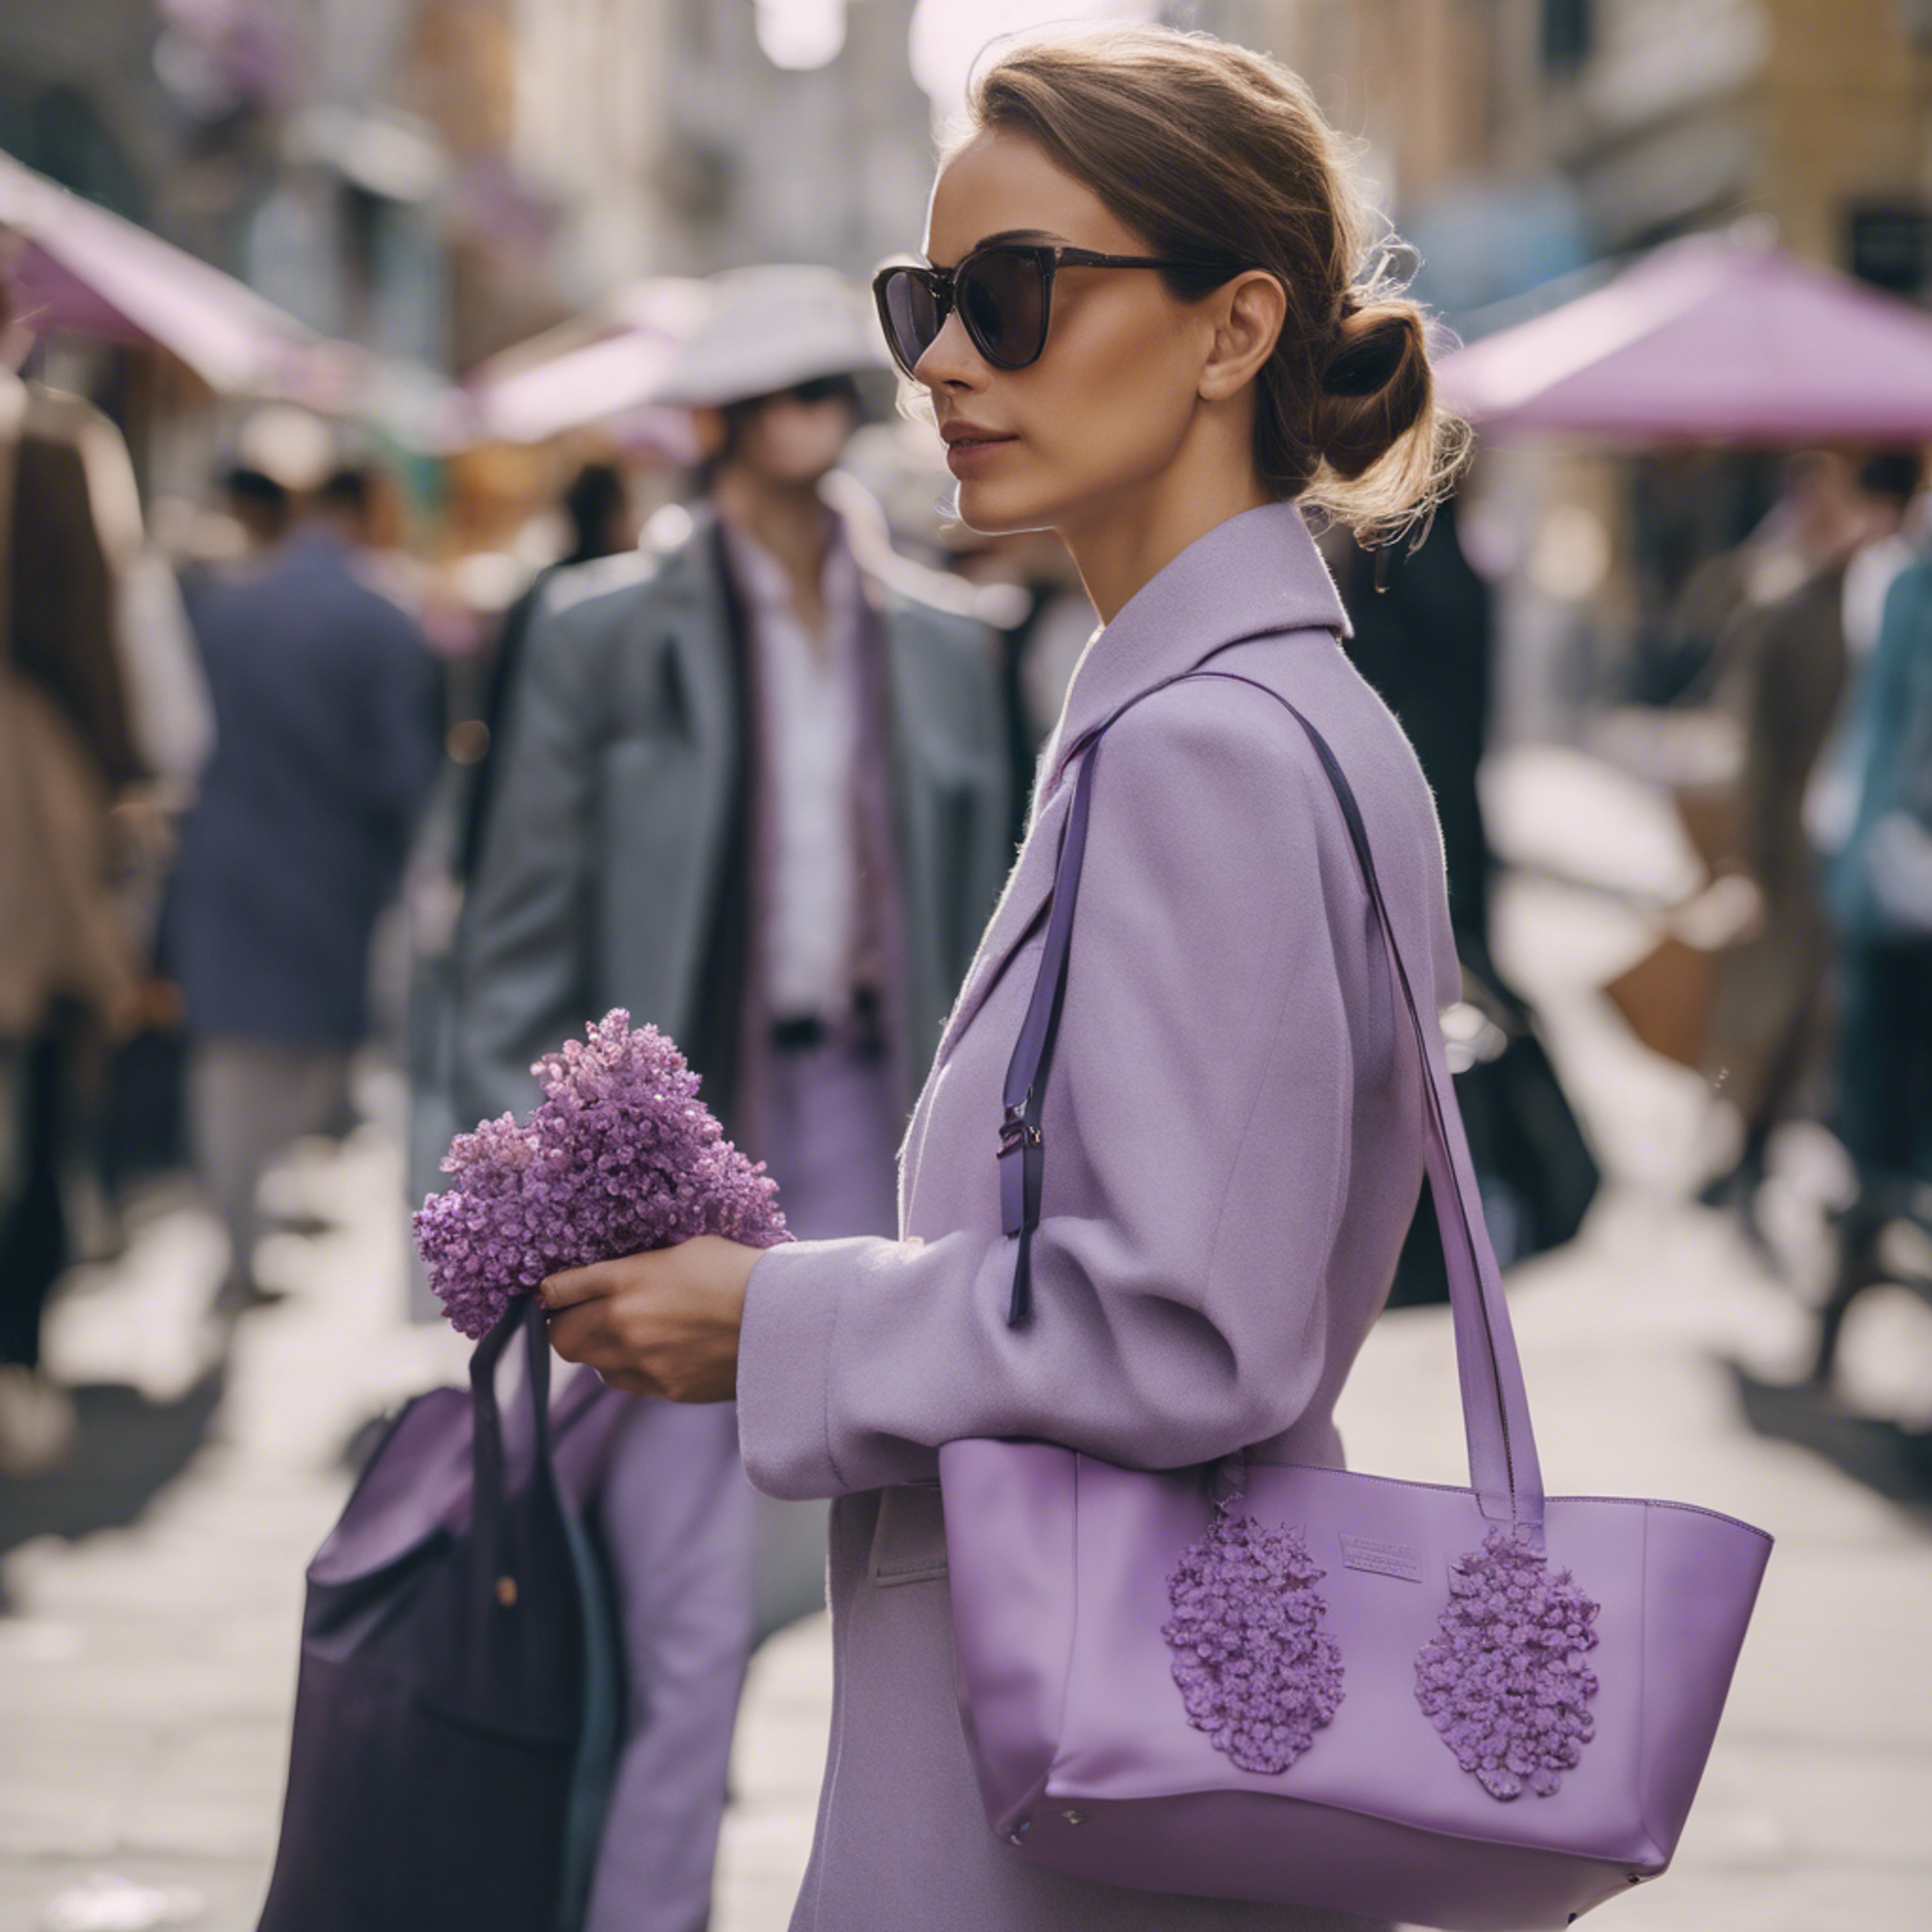 An elegant lady carrying a preppy lilac tote bag while walking along a crowded city street. Wallpaper[fda66da185c34bc685d3]